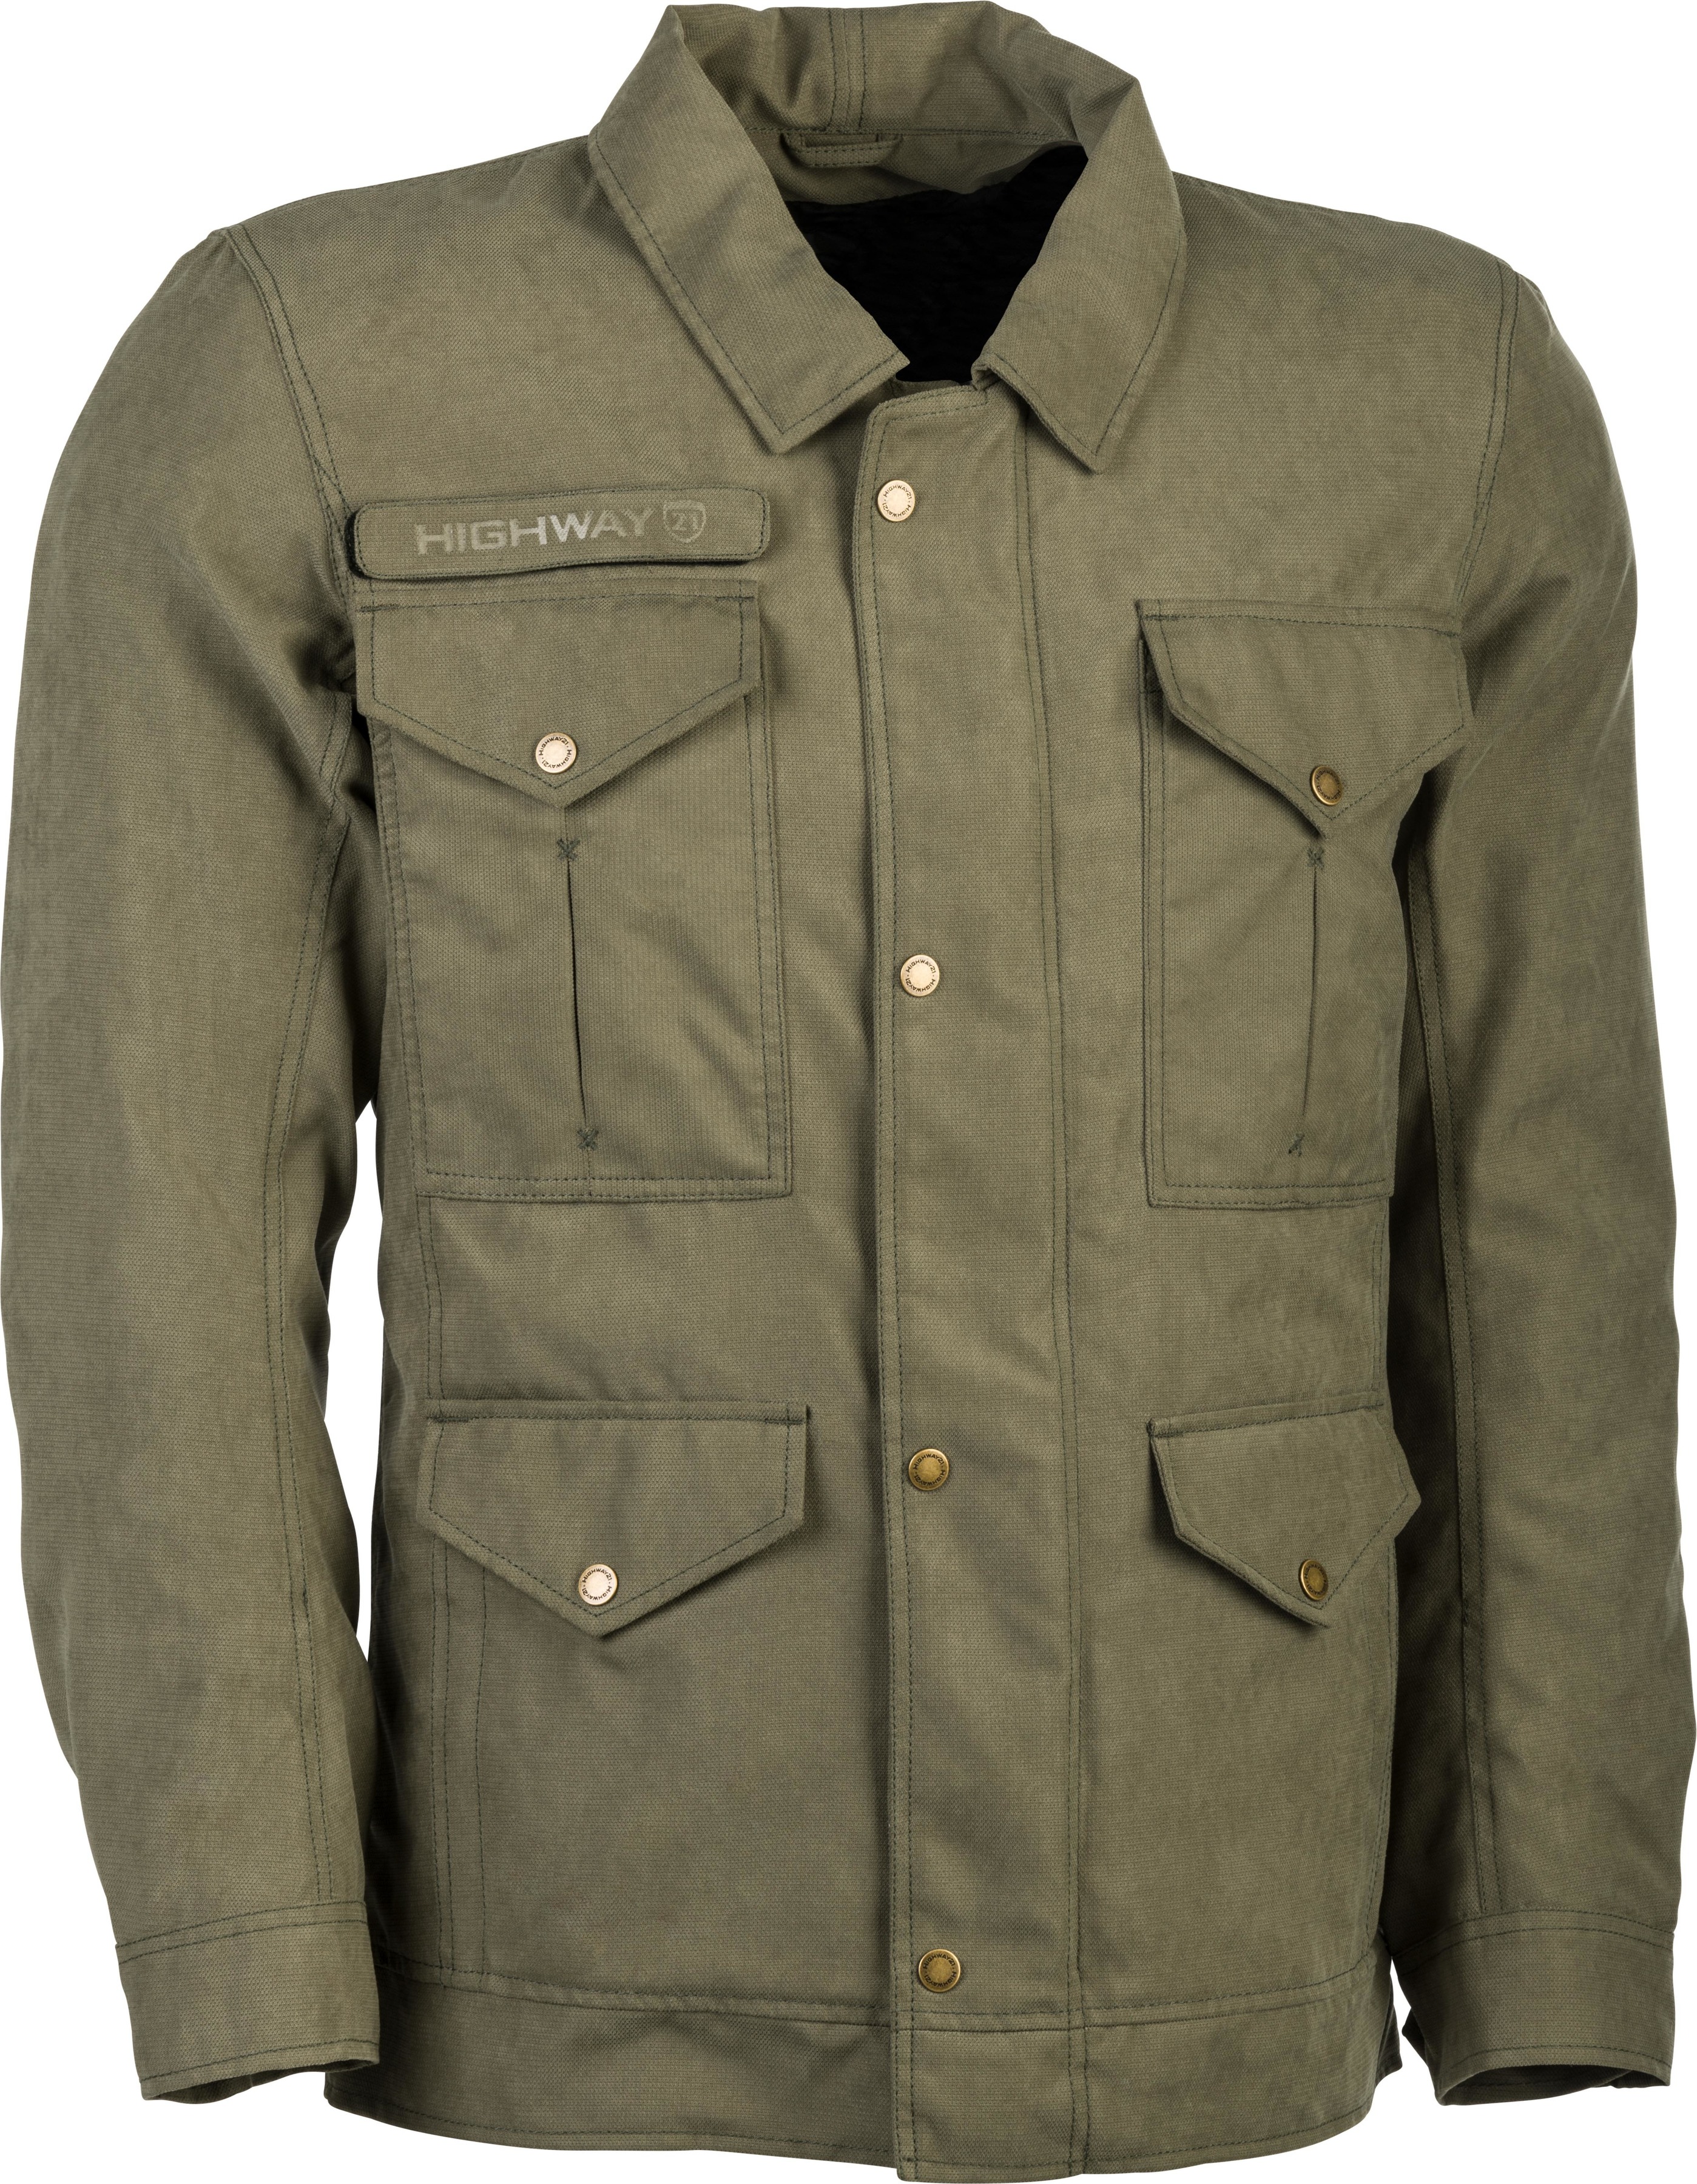 Winchester Riding Jacket Green Large - Click Image to Close